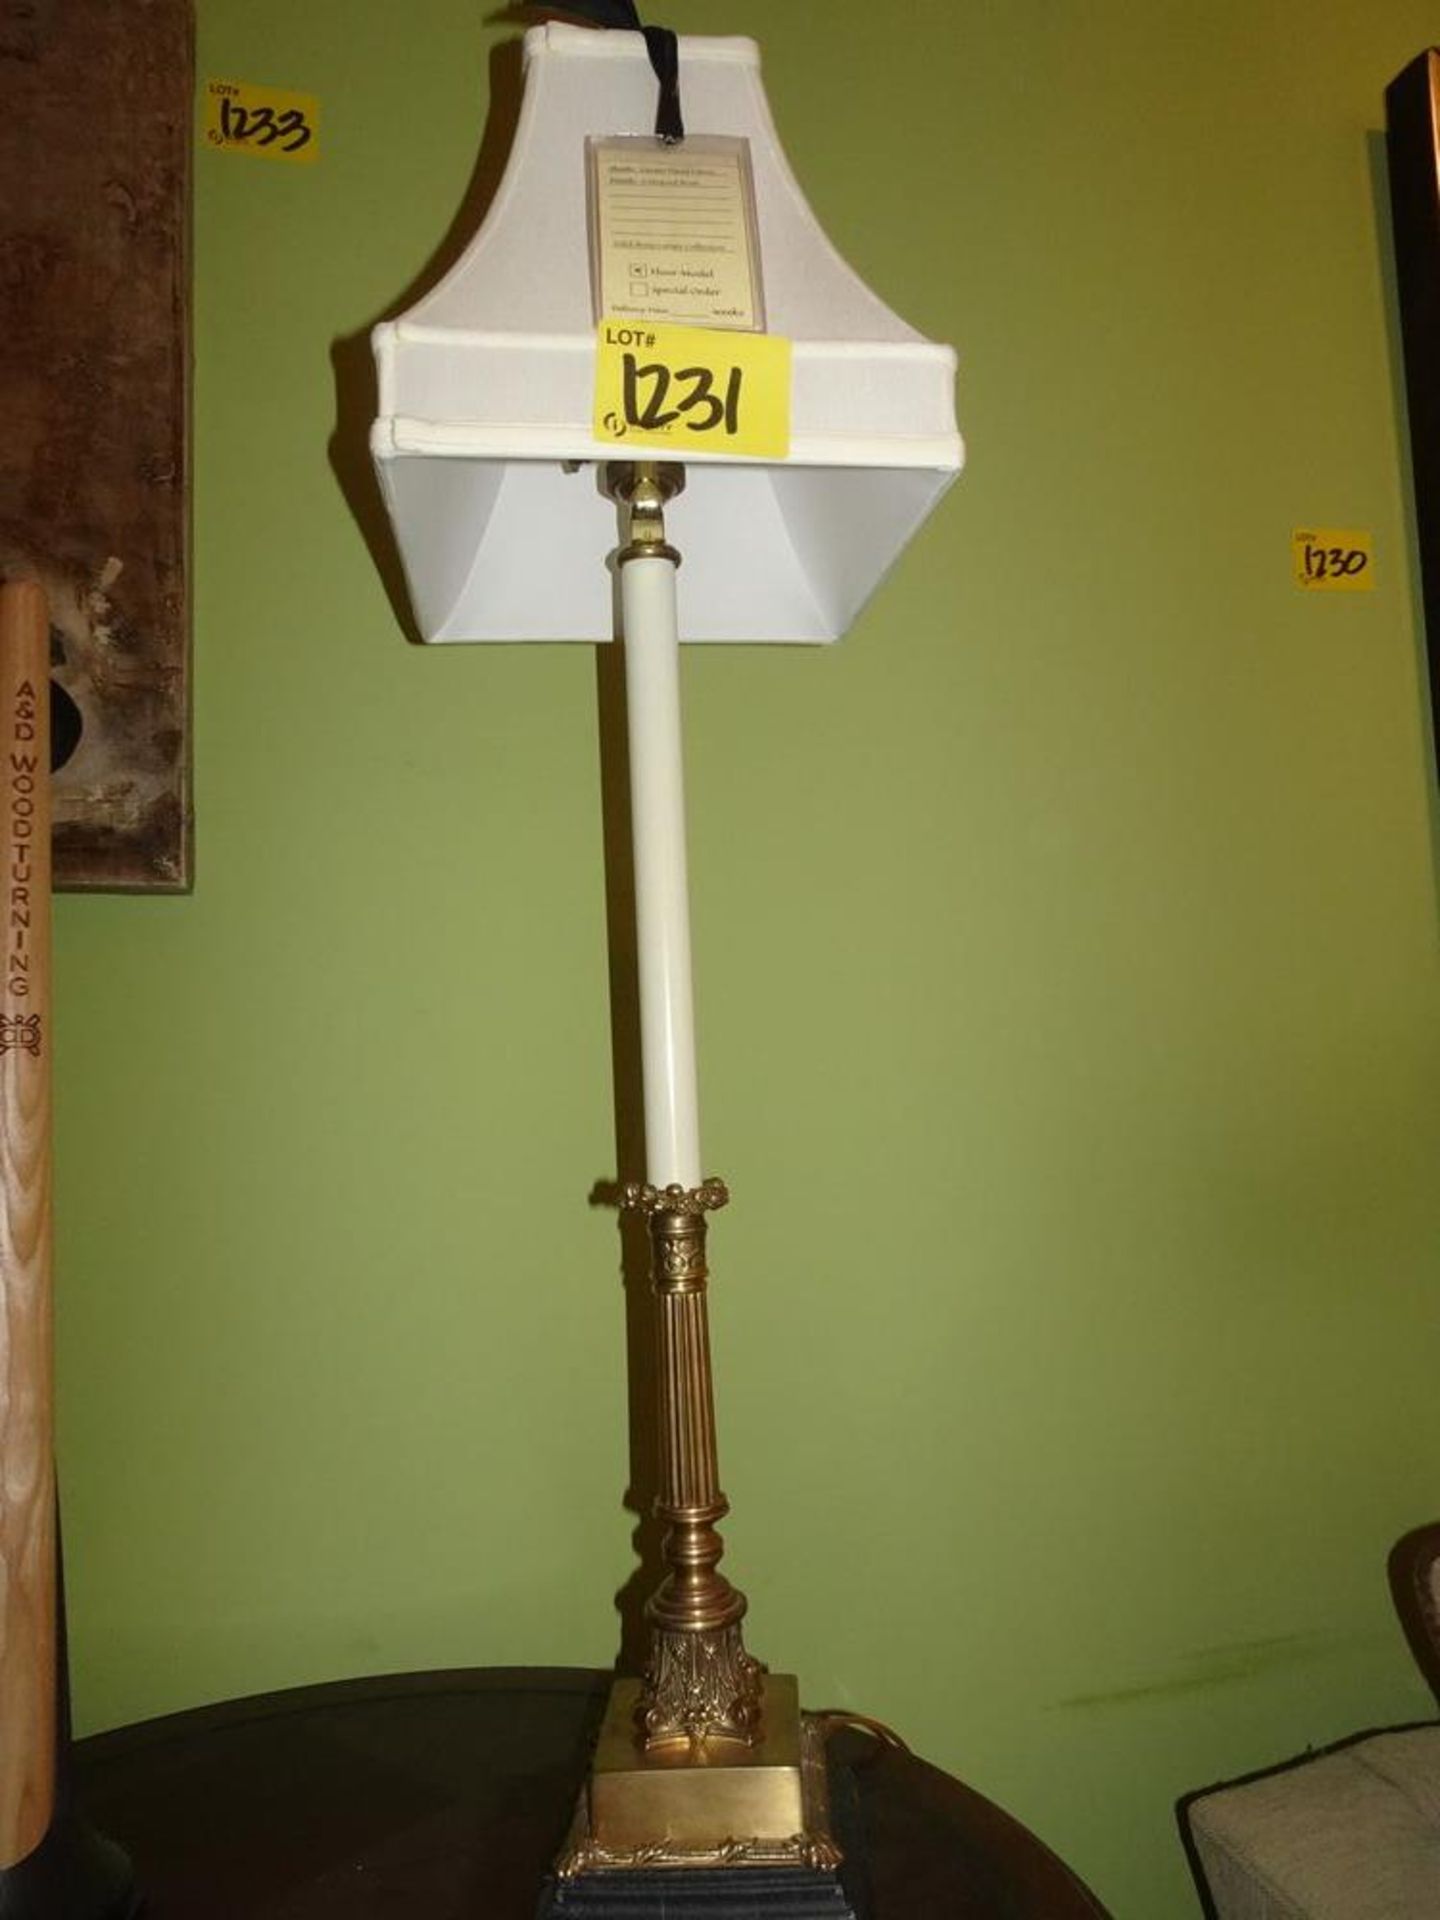 LOT (2) TABLE LAMP - ANTIQUE BRASS BASE, SILKEN SHADE (DAMAGE TO ONE SHADE) - Image 8 of 10